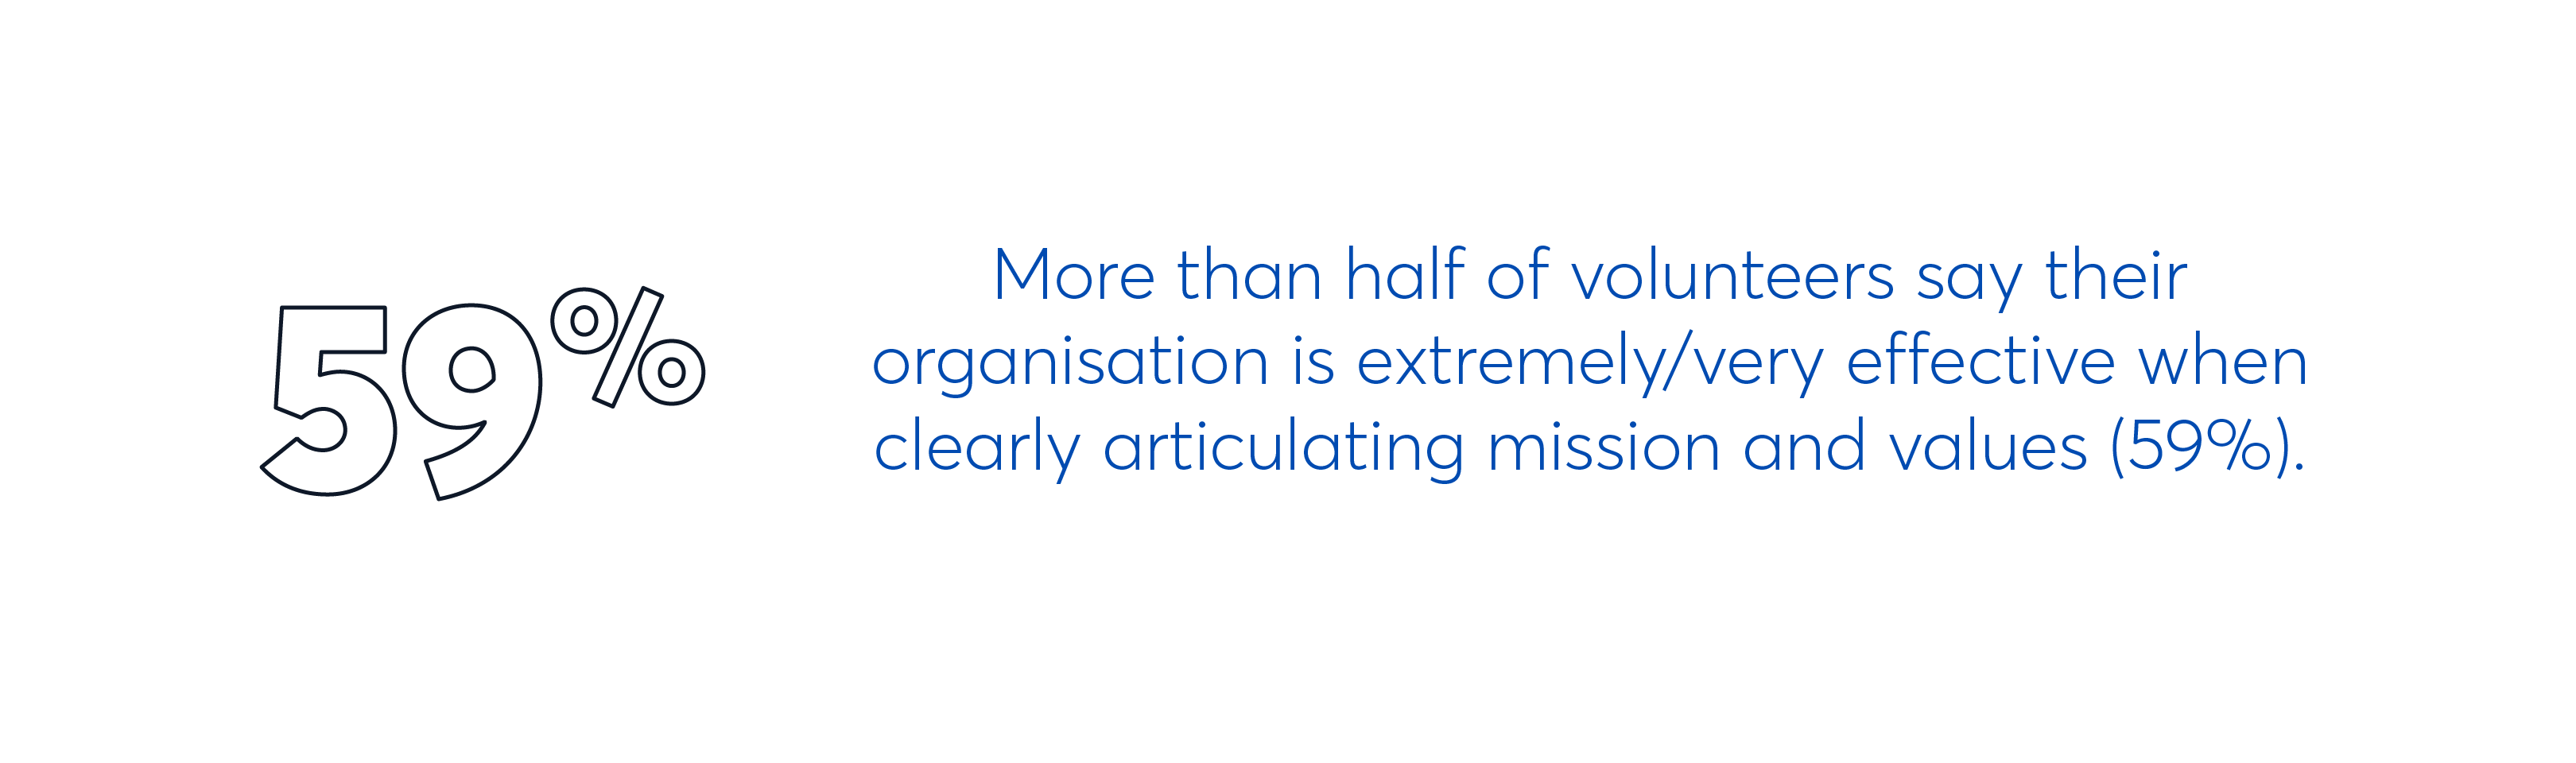 Org is effective in articulating mission and values